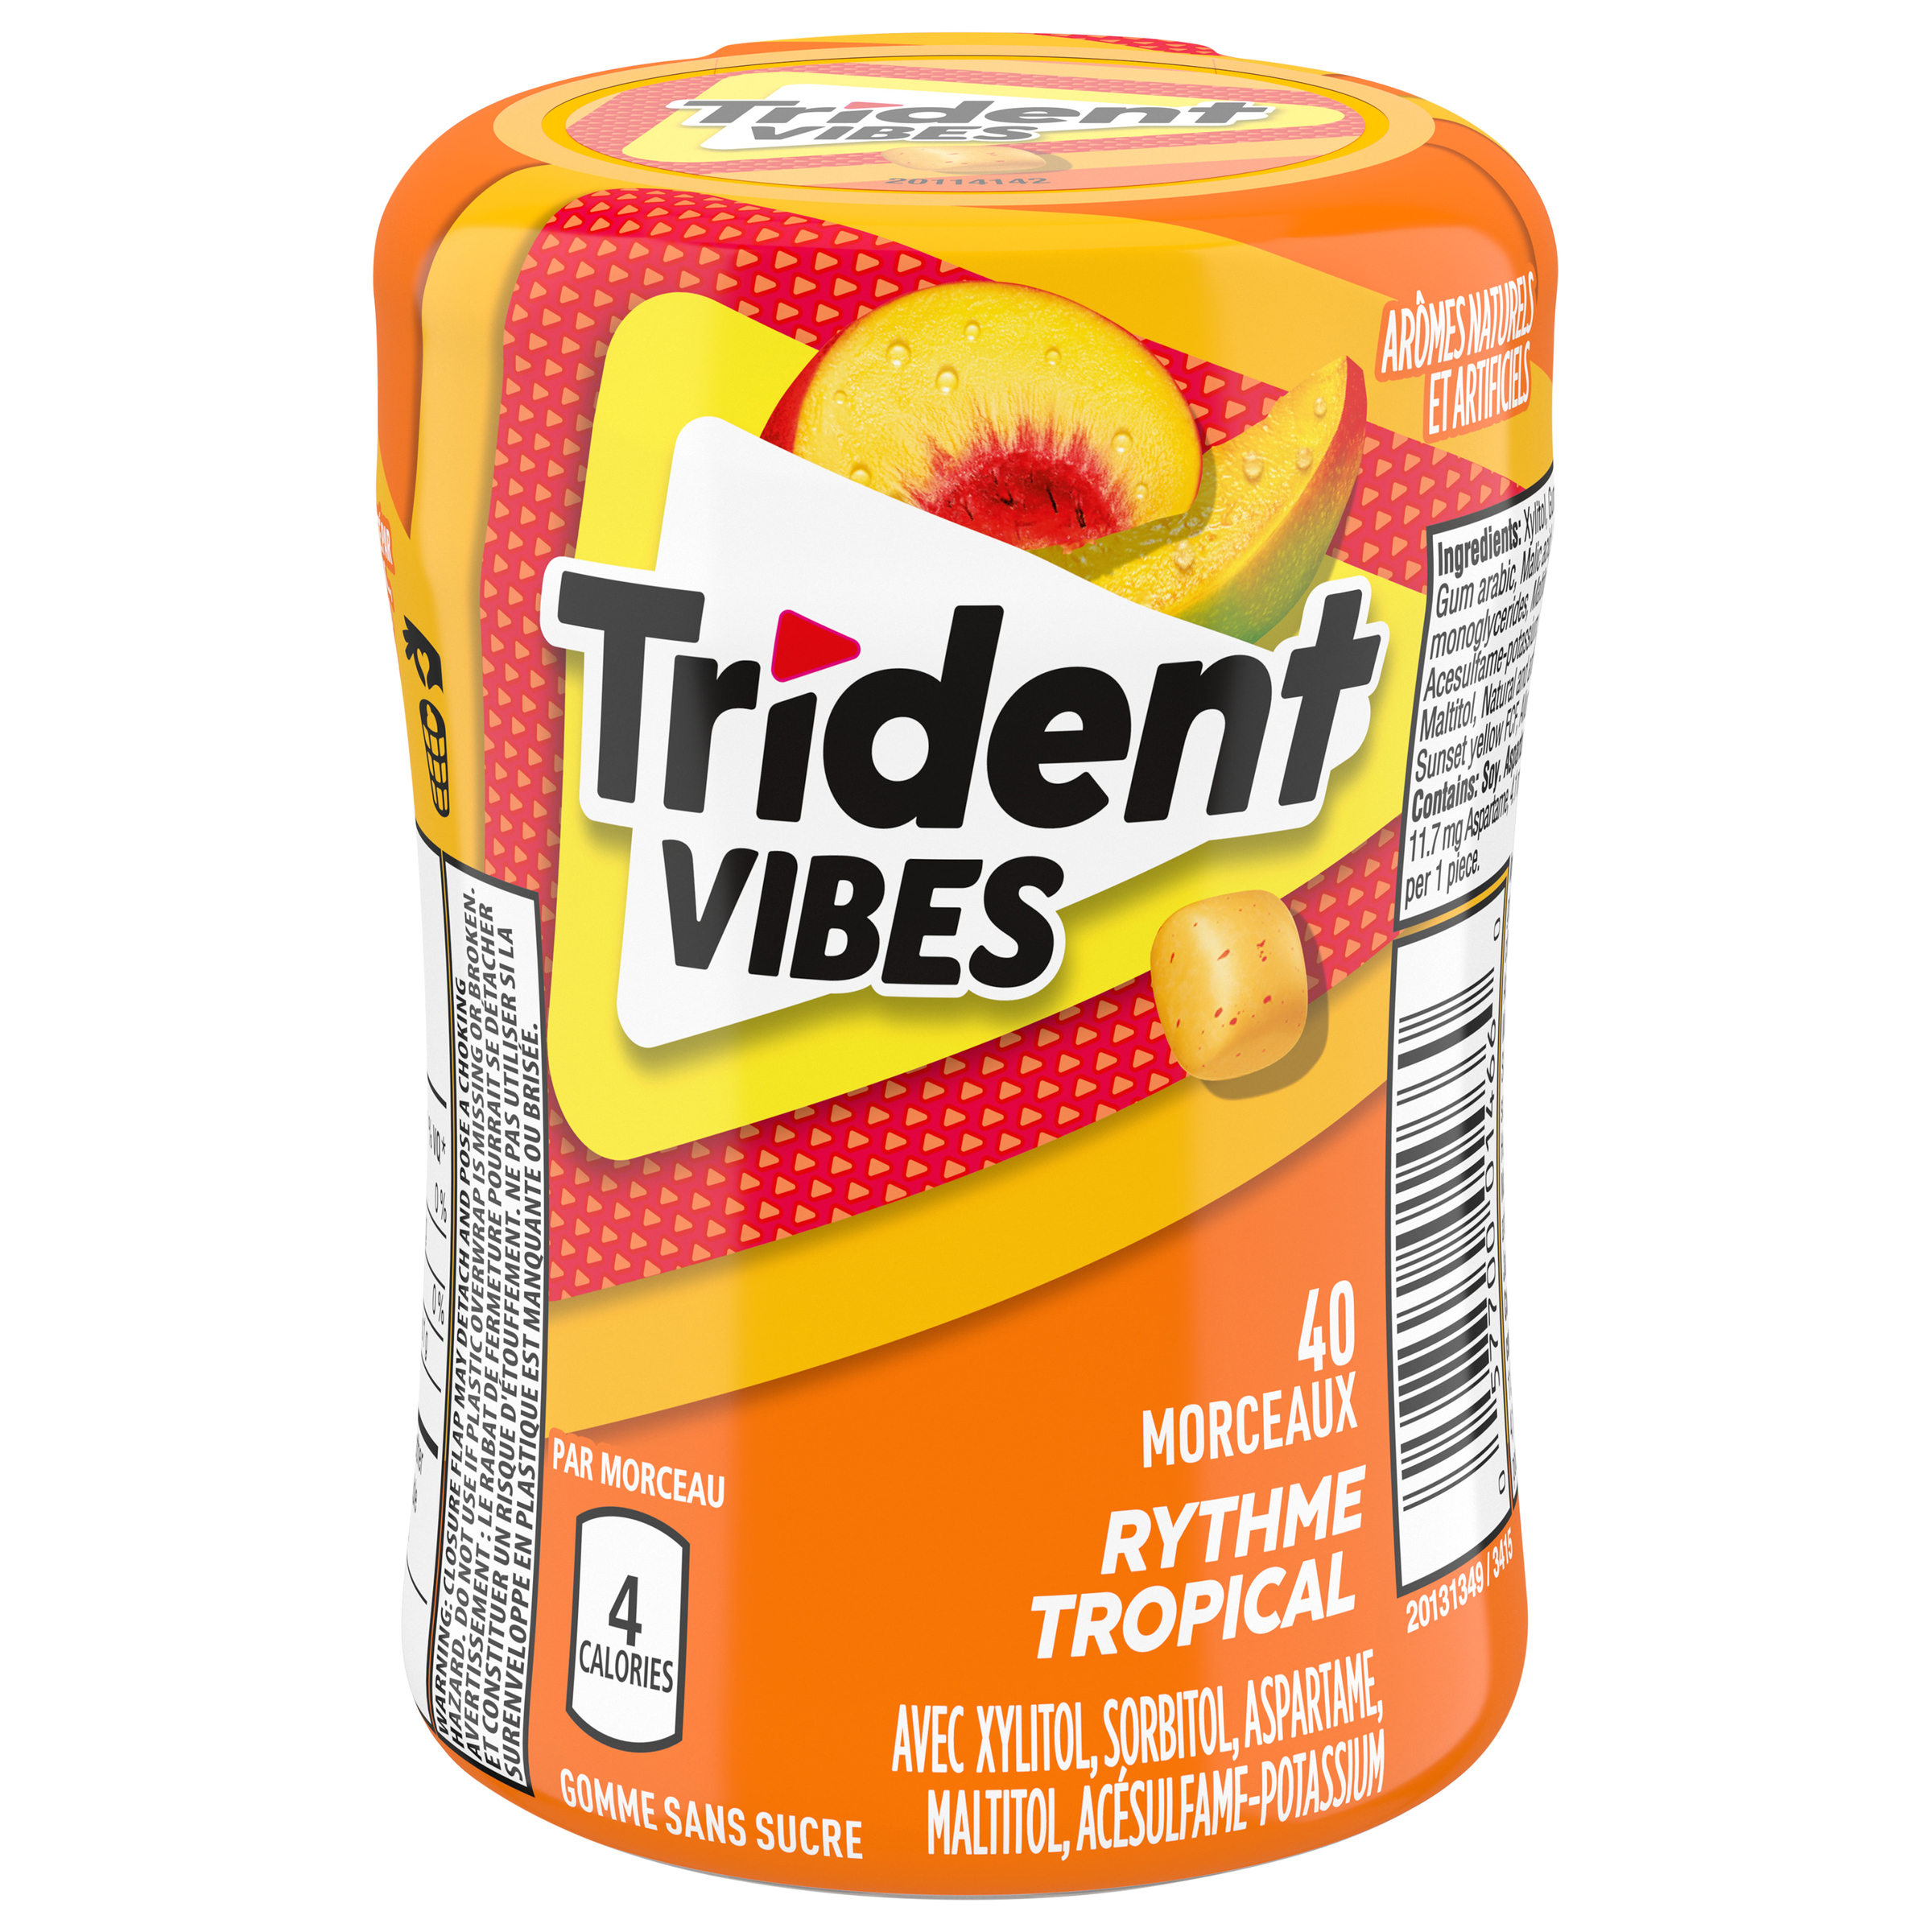 Trident Vibes Sugar Free Gum, Tropical Beat Flavour, 1 Go-Cup (40 Pieces Total)